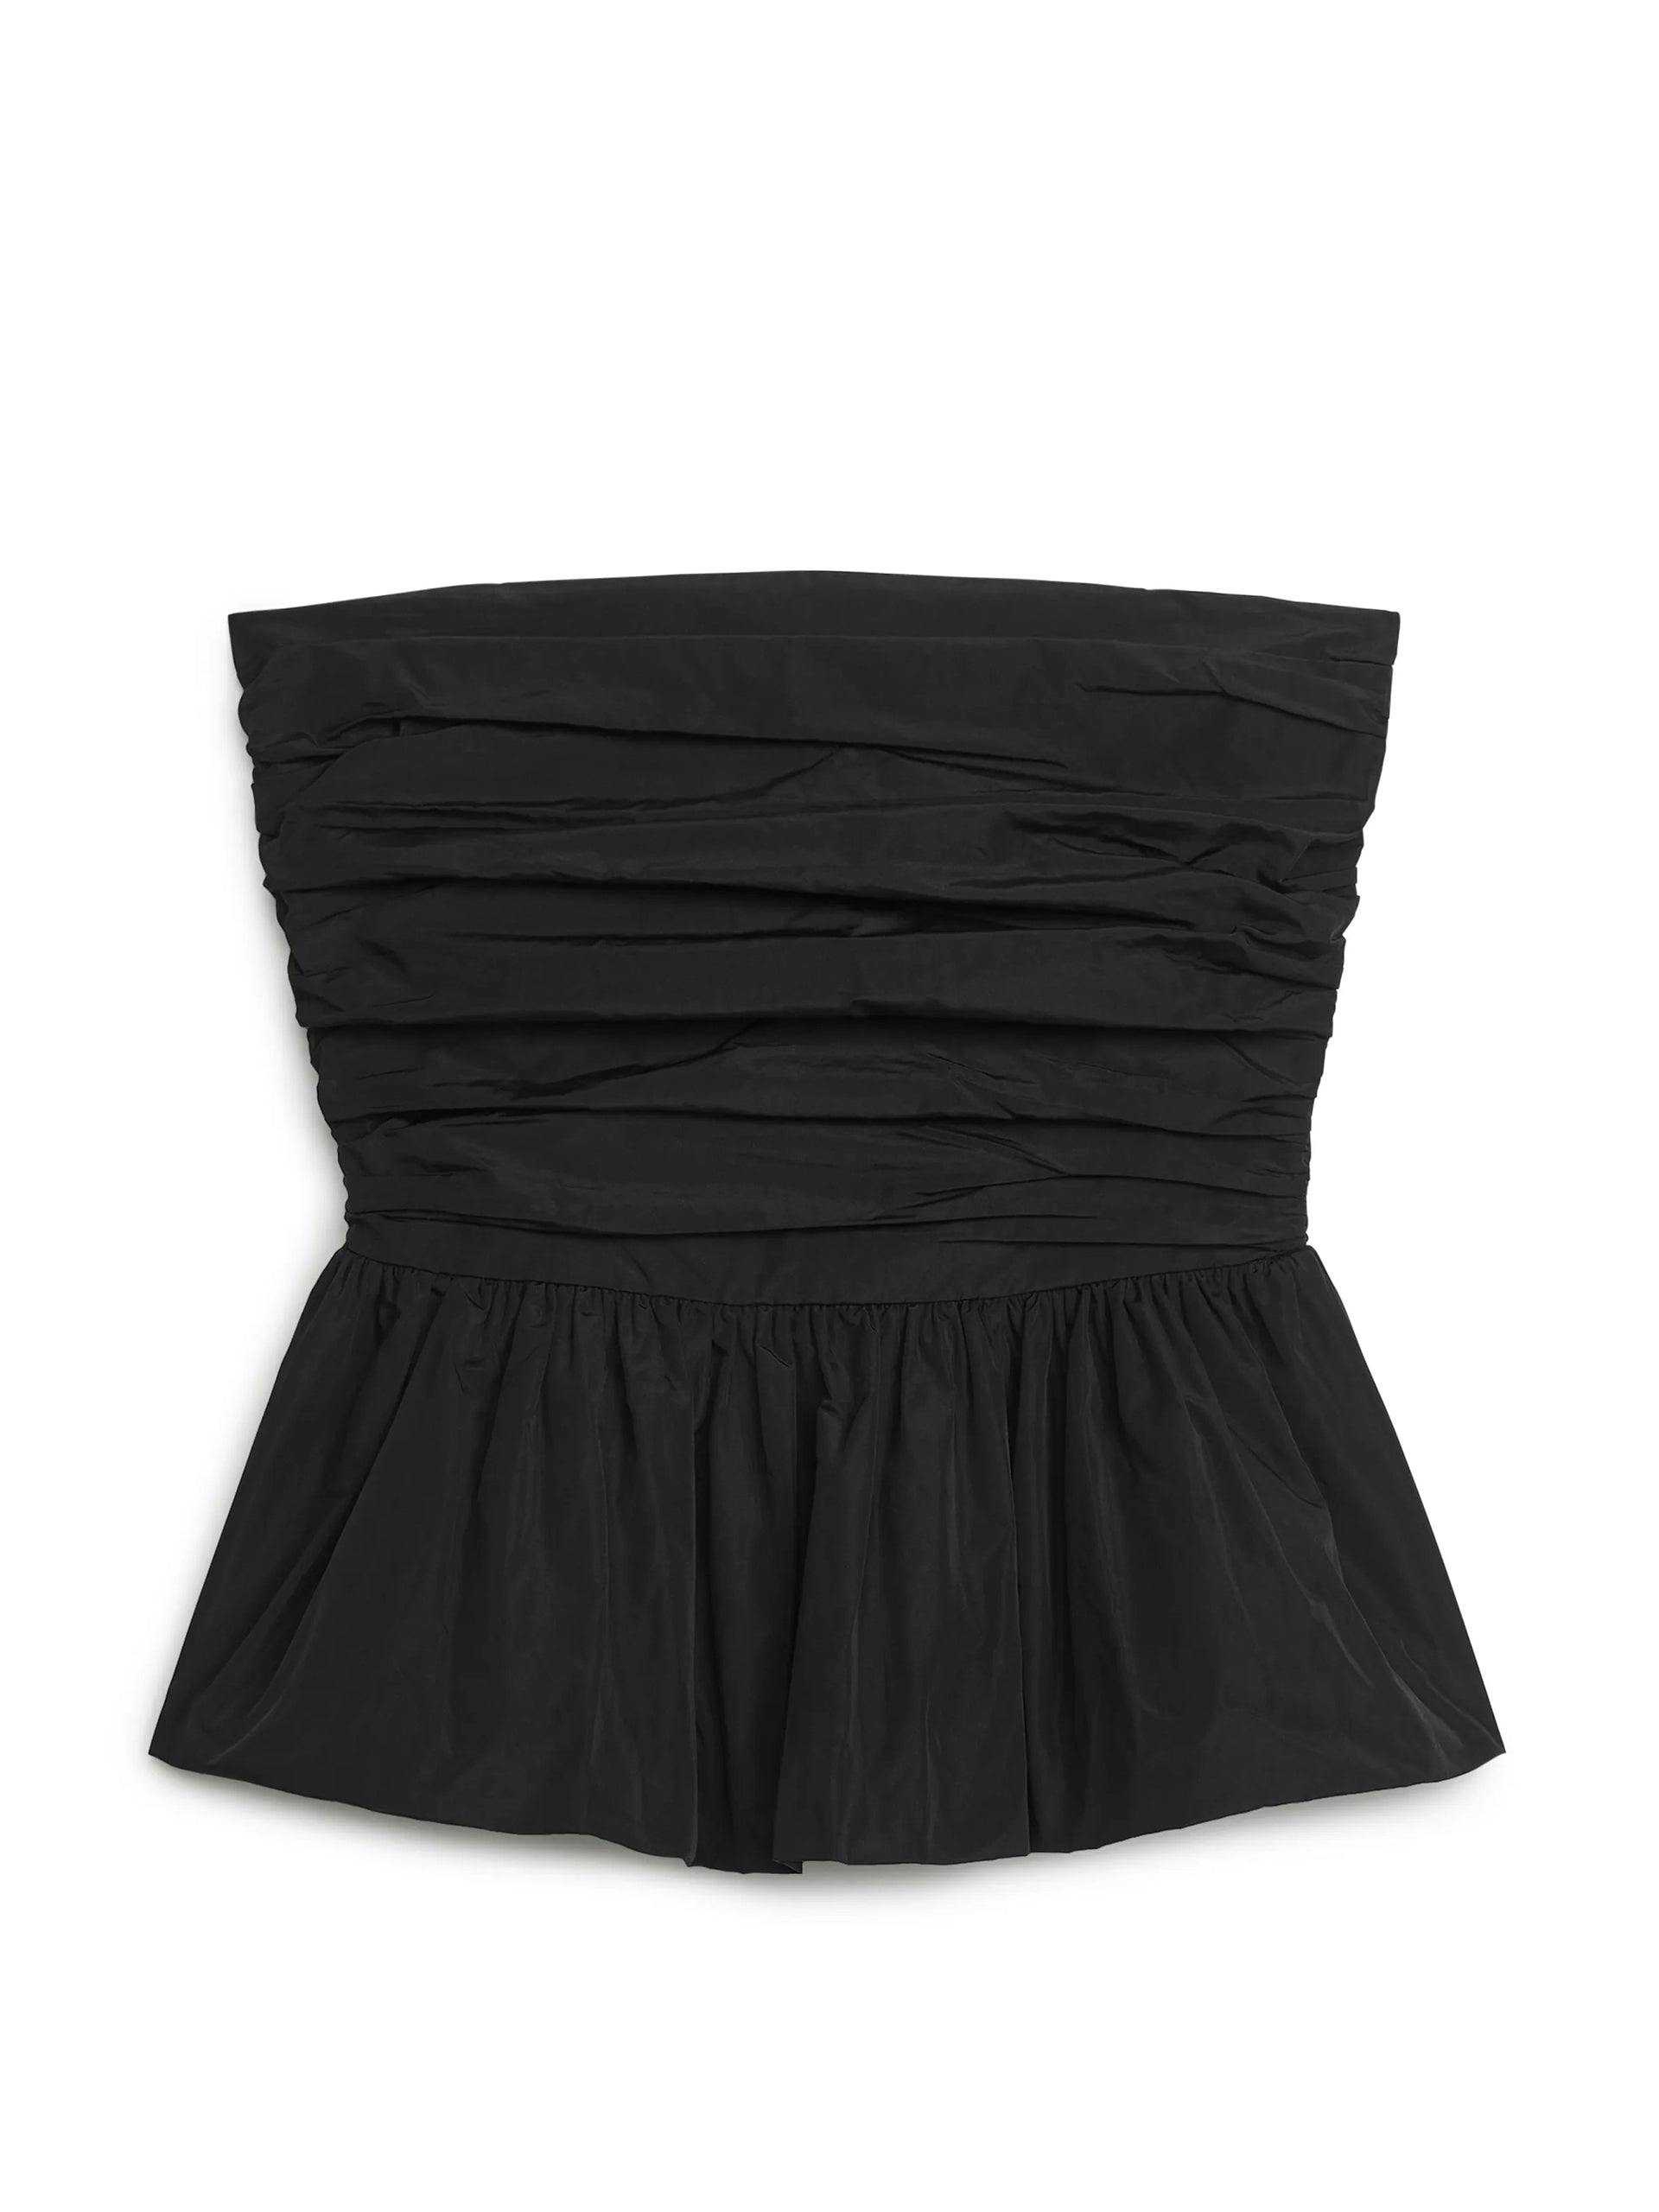 Black ruched bustier